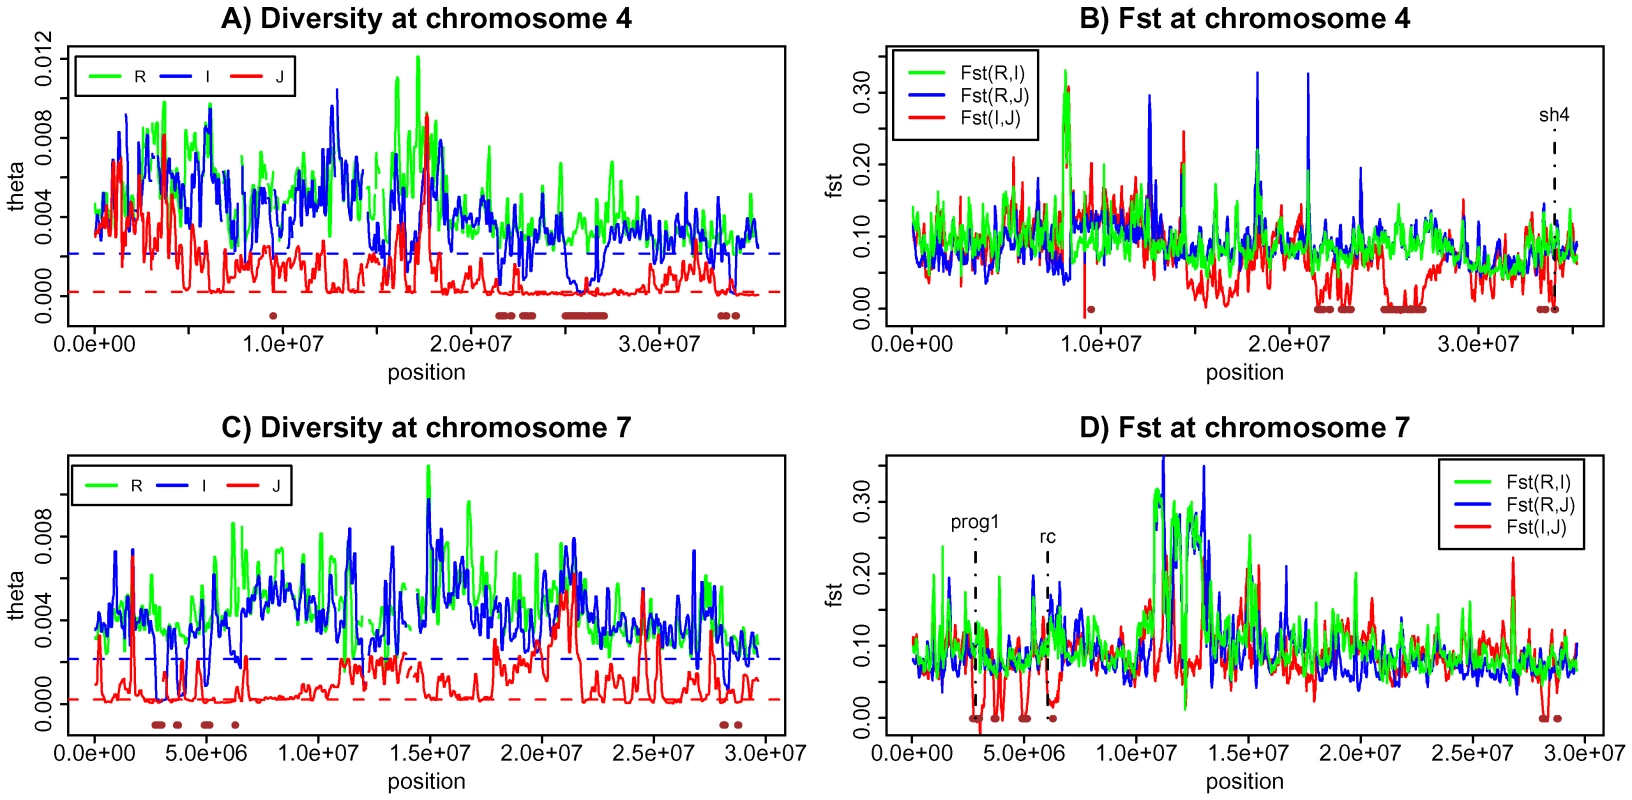 Genetic diversity and population differentiation at chromosome 4 and 7.